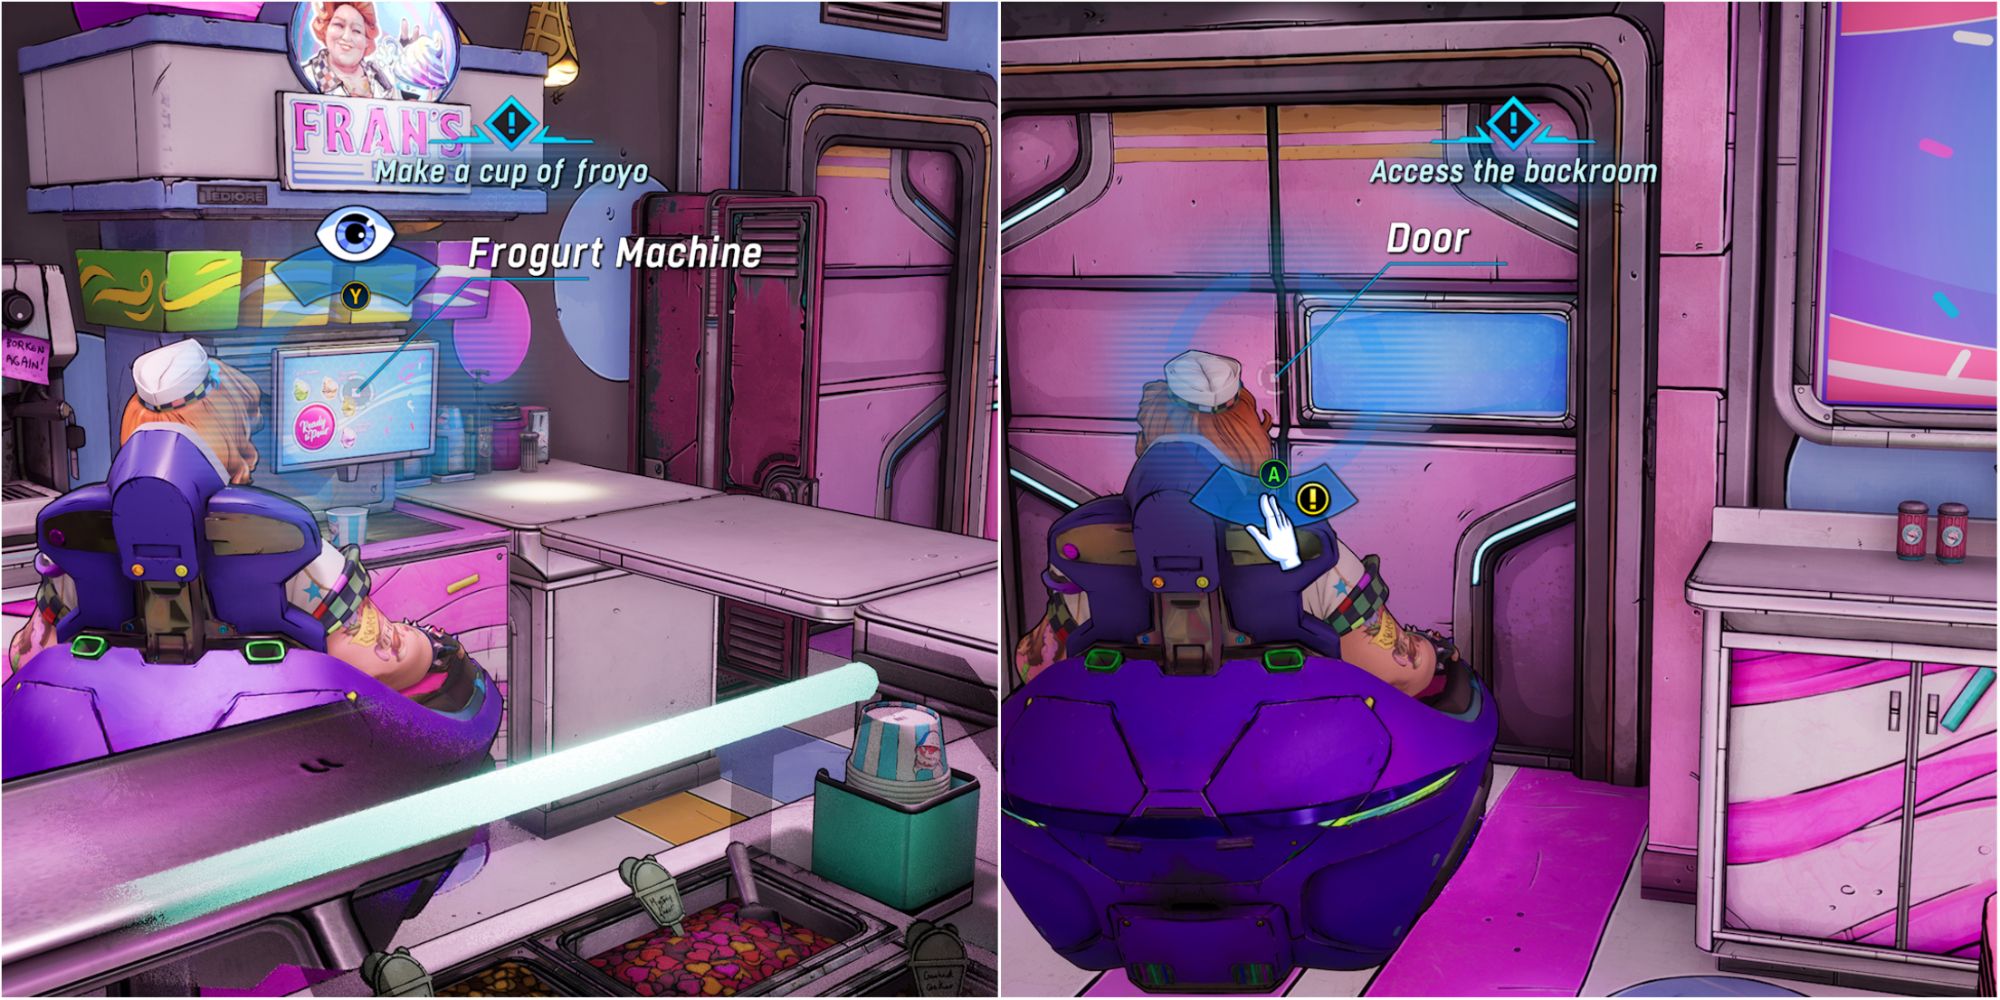 New Tales From The Borderlands Split Image Froyo Machine and Backroom